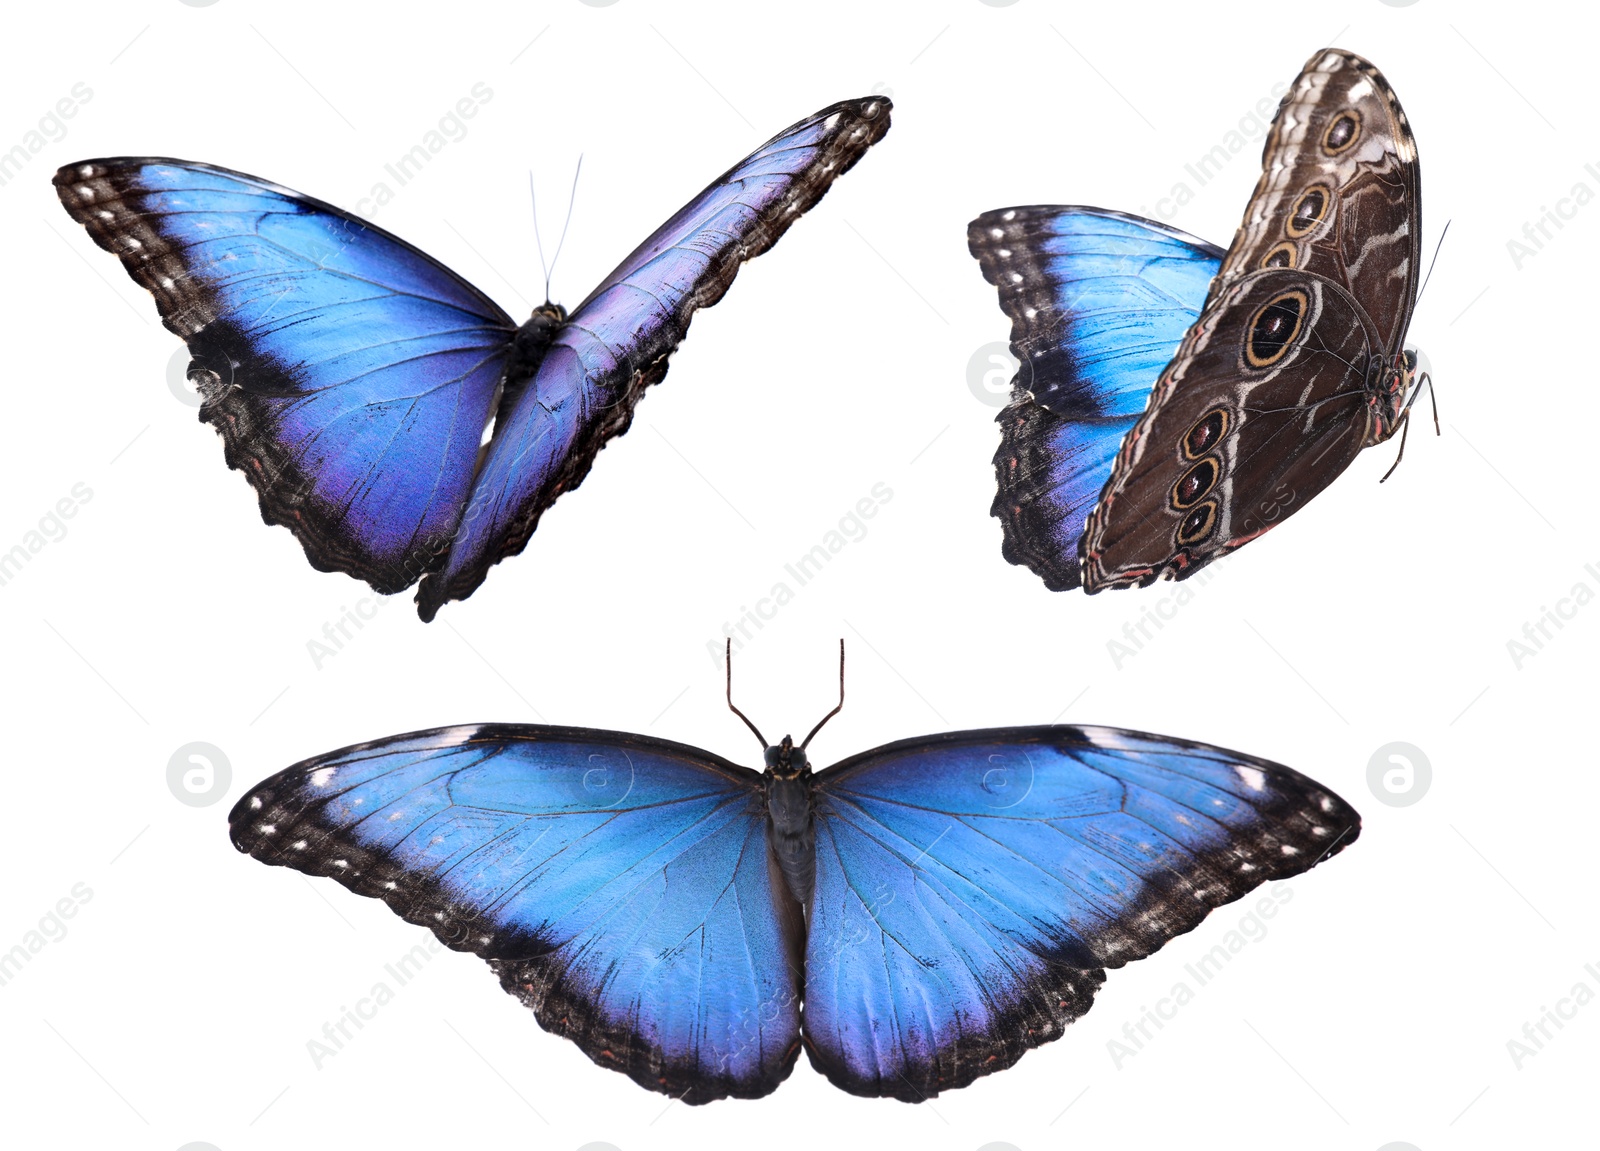 Image of Set of beautiful blue morpho butterflies on white background